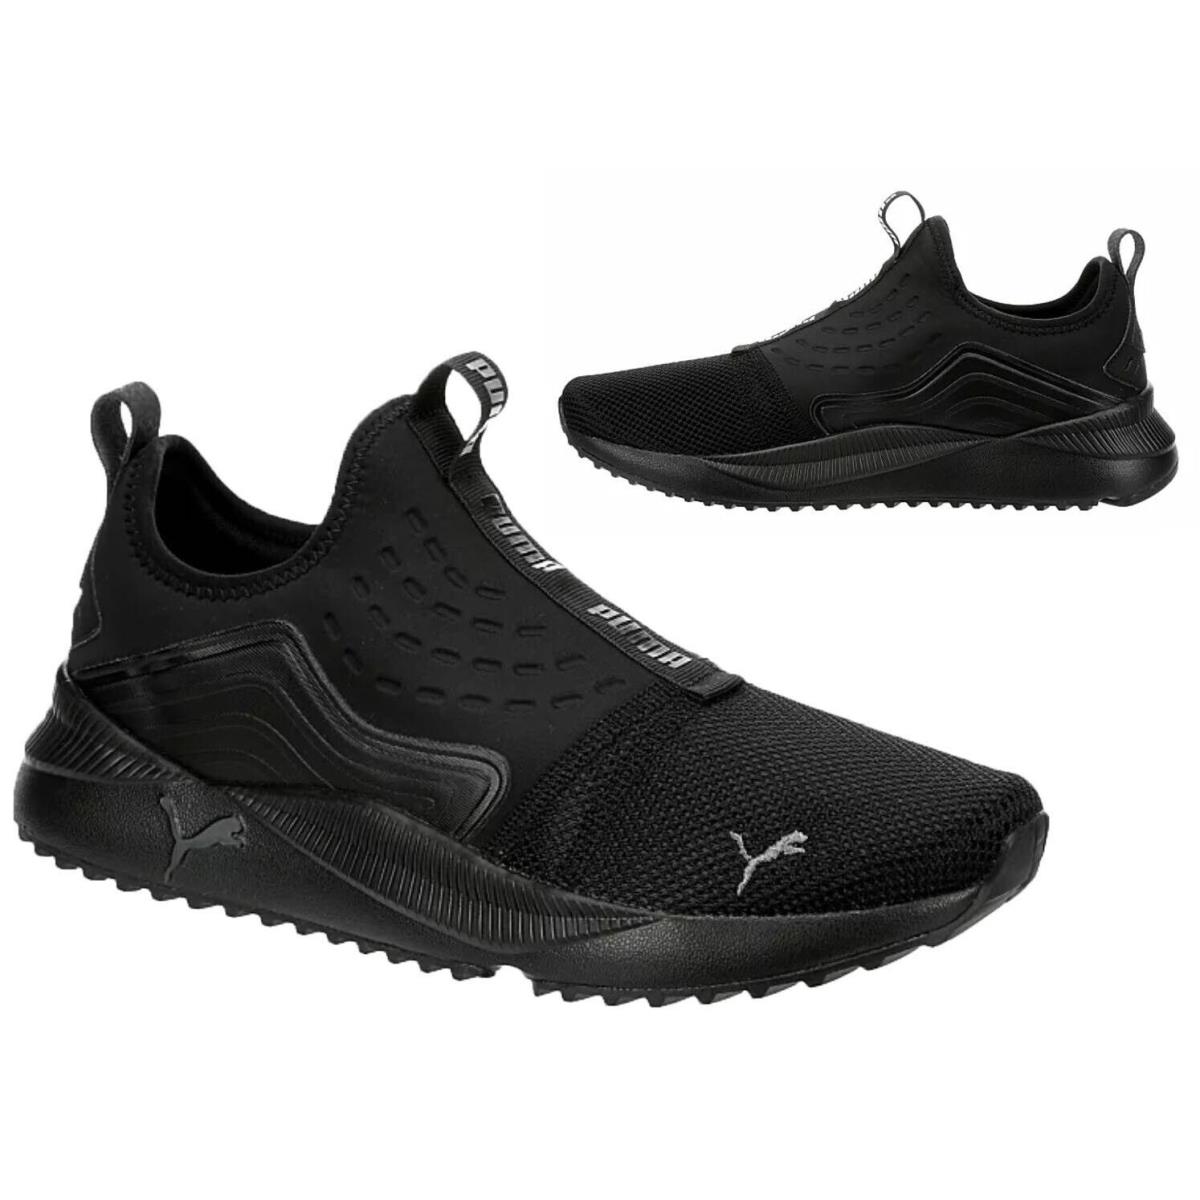 Puma Casual Shoes Slip On Athletic Sneakers Mens Black Gray All Sizes